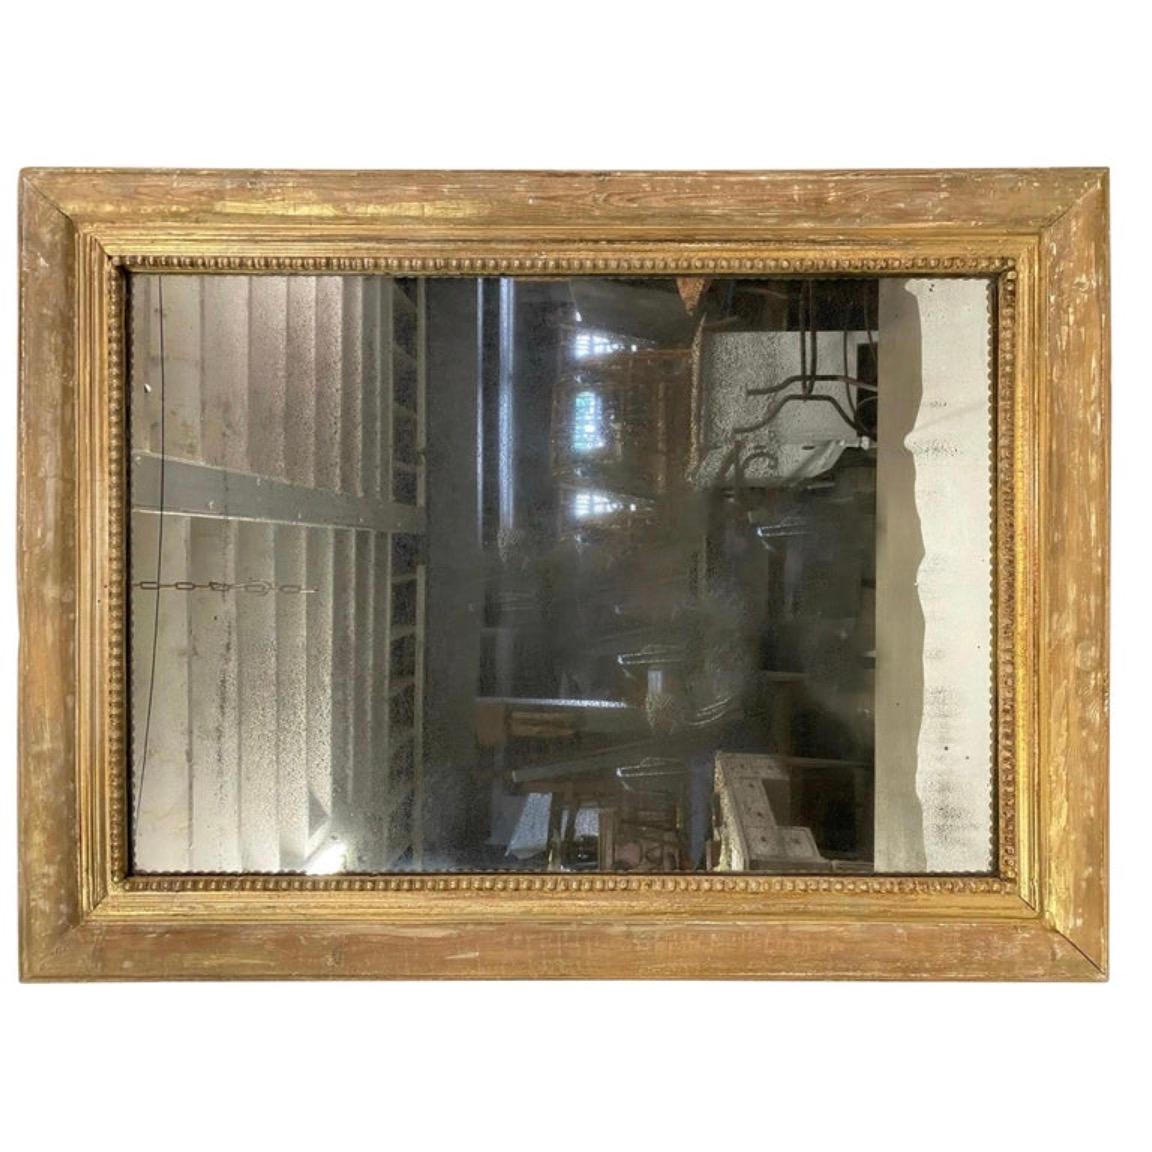 A simple yet elegant 18th Century French Louis XVI style giltwood wall mirror with a fine beaded border. The rectangular wall mirror has lost most of the gilt but retains a nicely weathered patina. Placed the mirror above a vanity in a powder room,